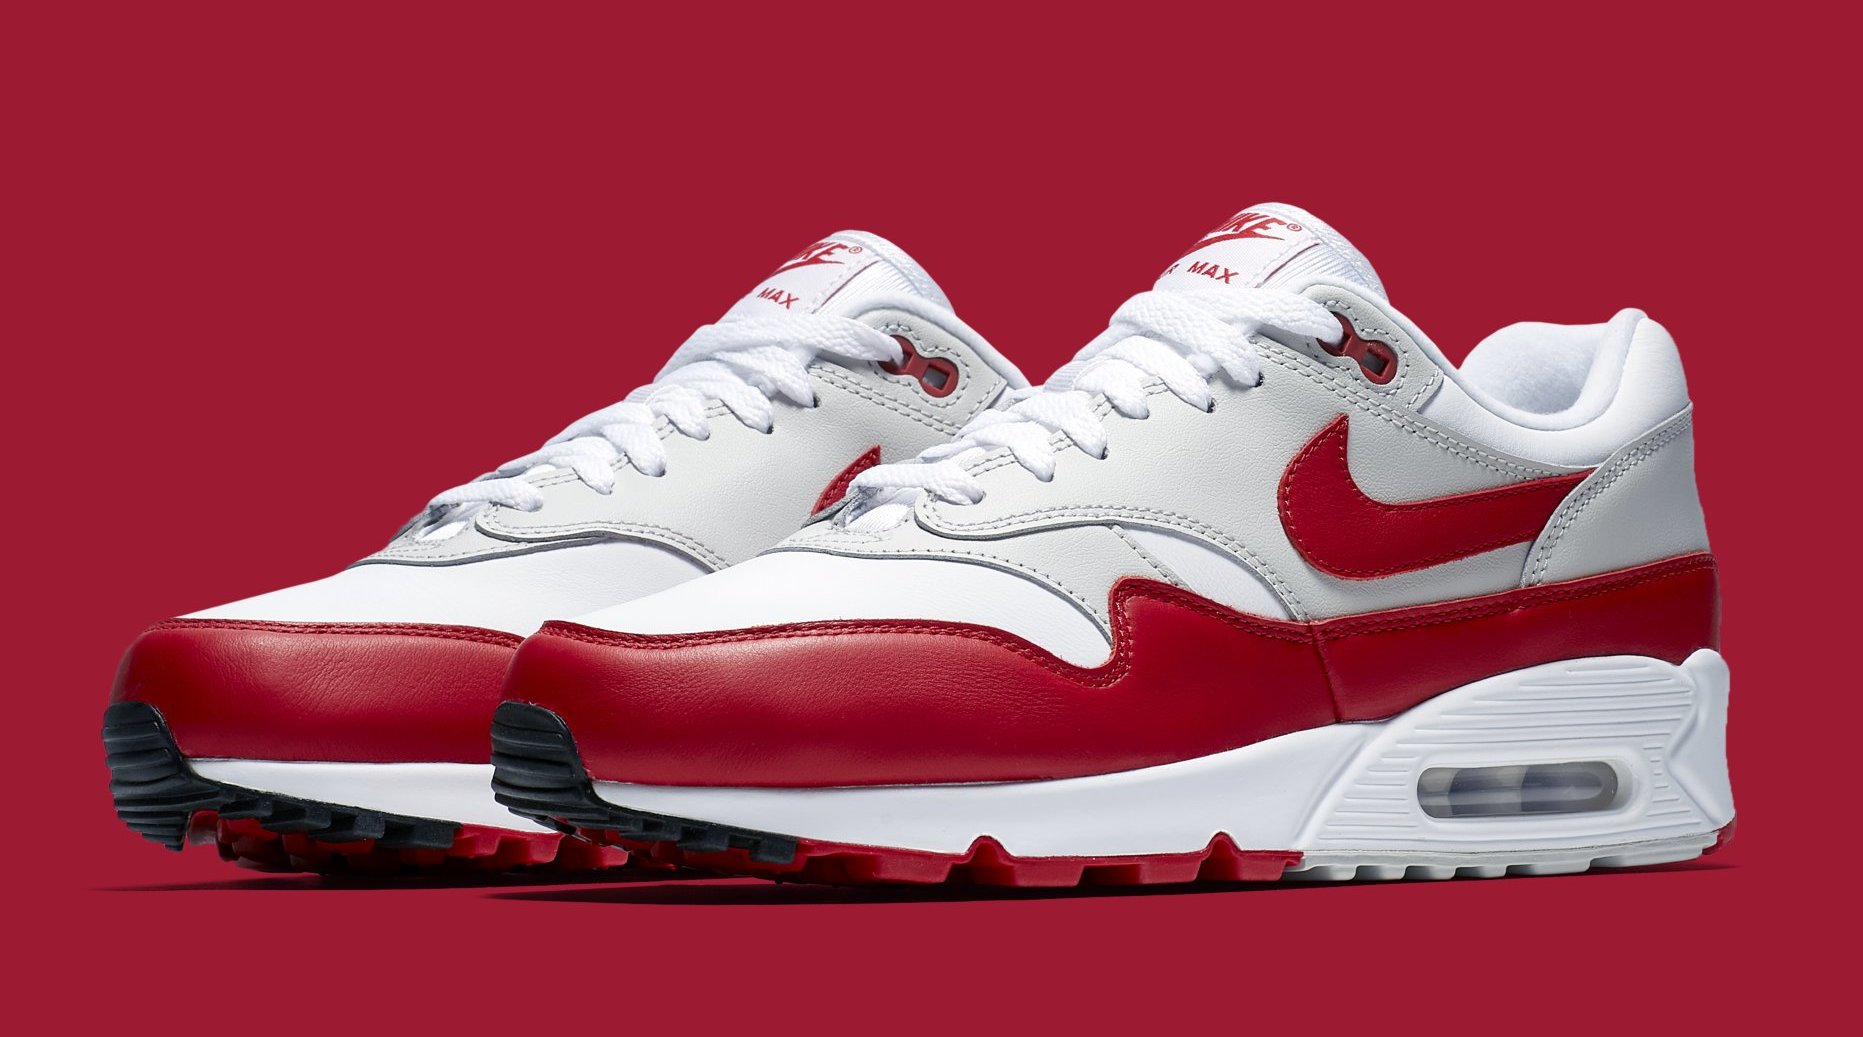 red and white air max 90s